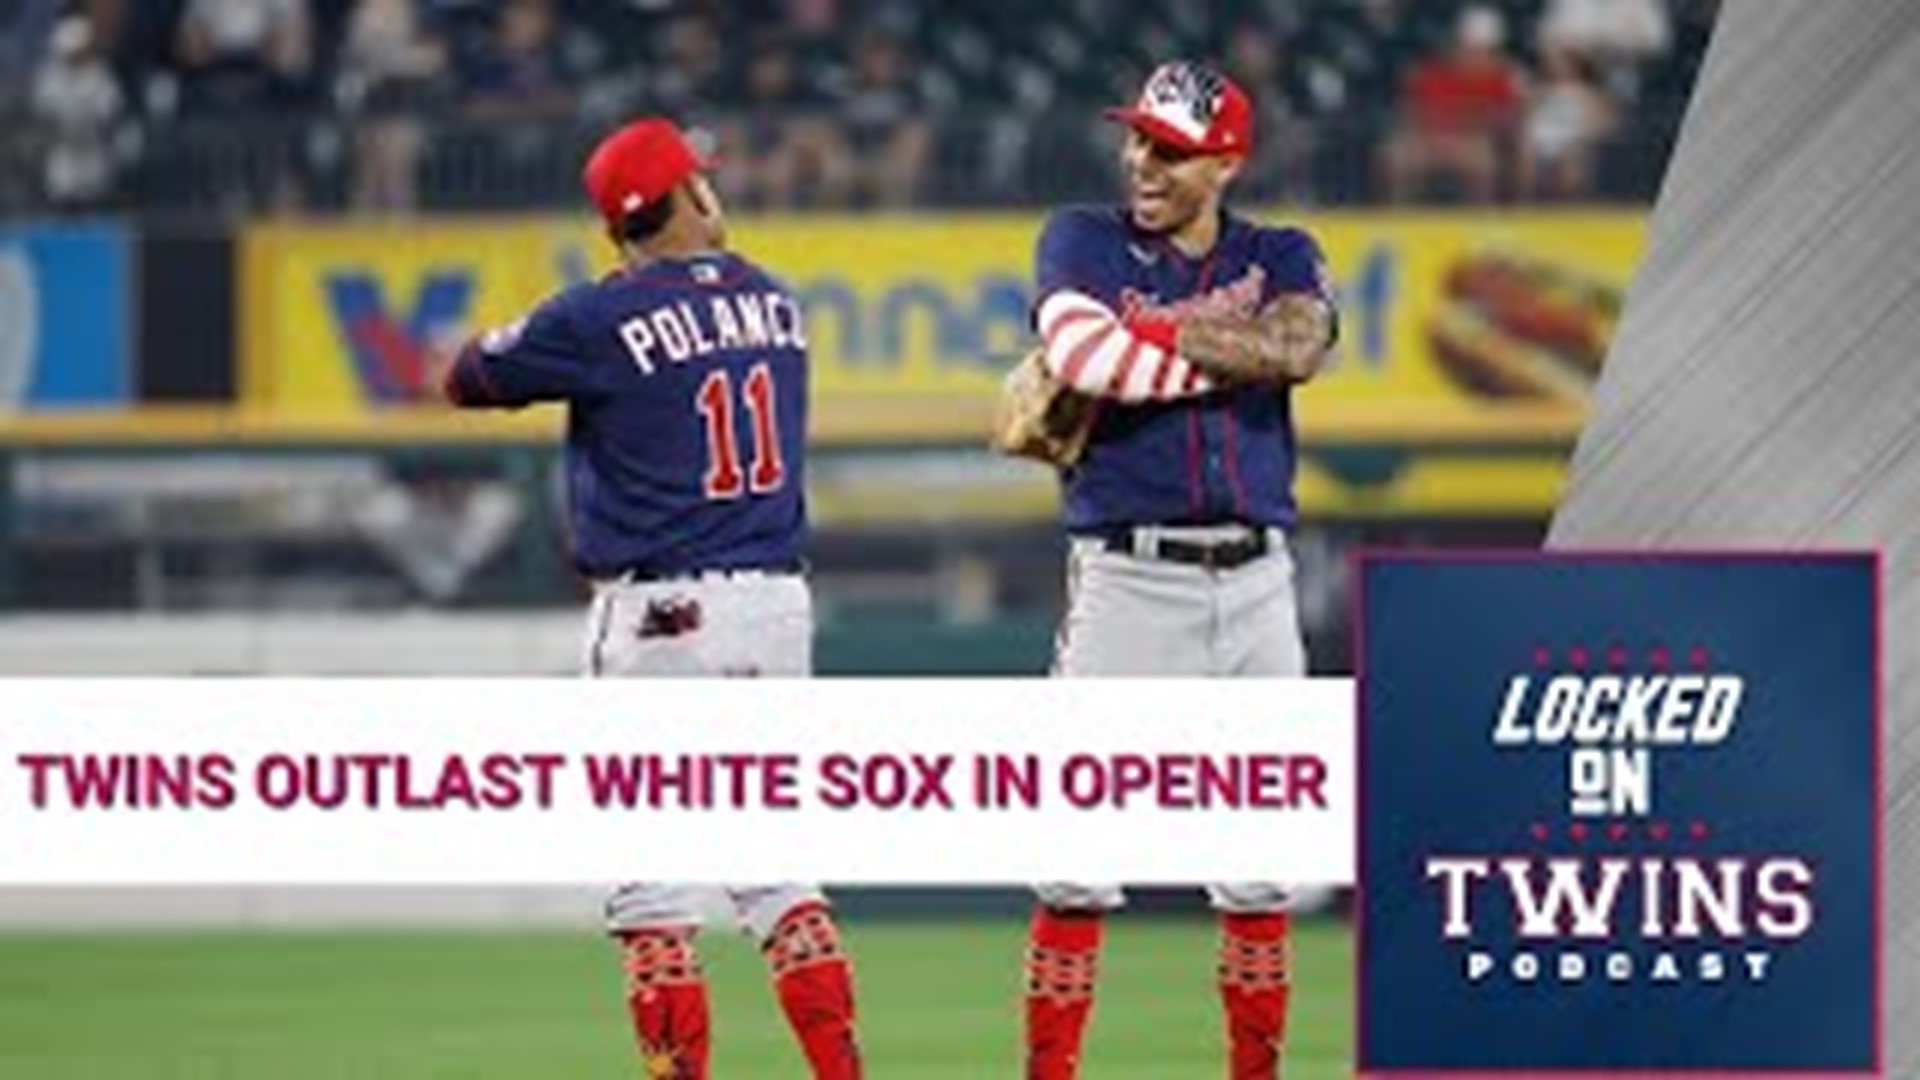 The Minnesota Twins defeated the Chicago White Sox 6-3 in extras to improve to 4-0 against them this season.